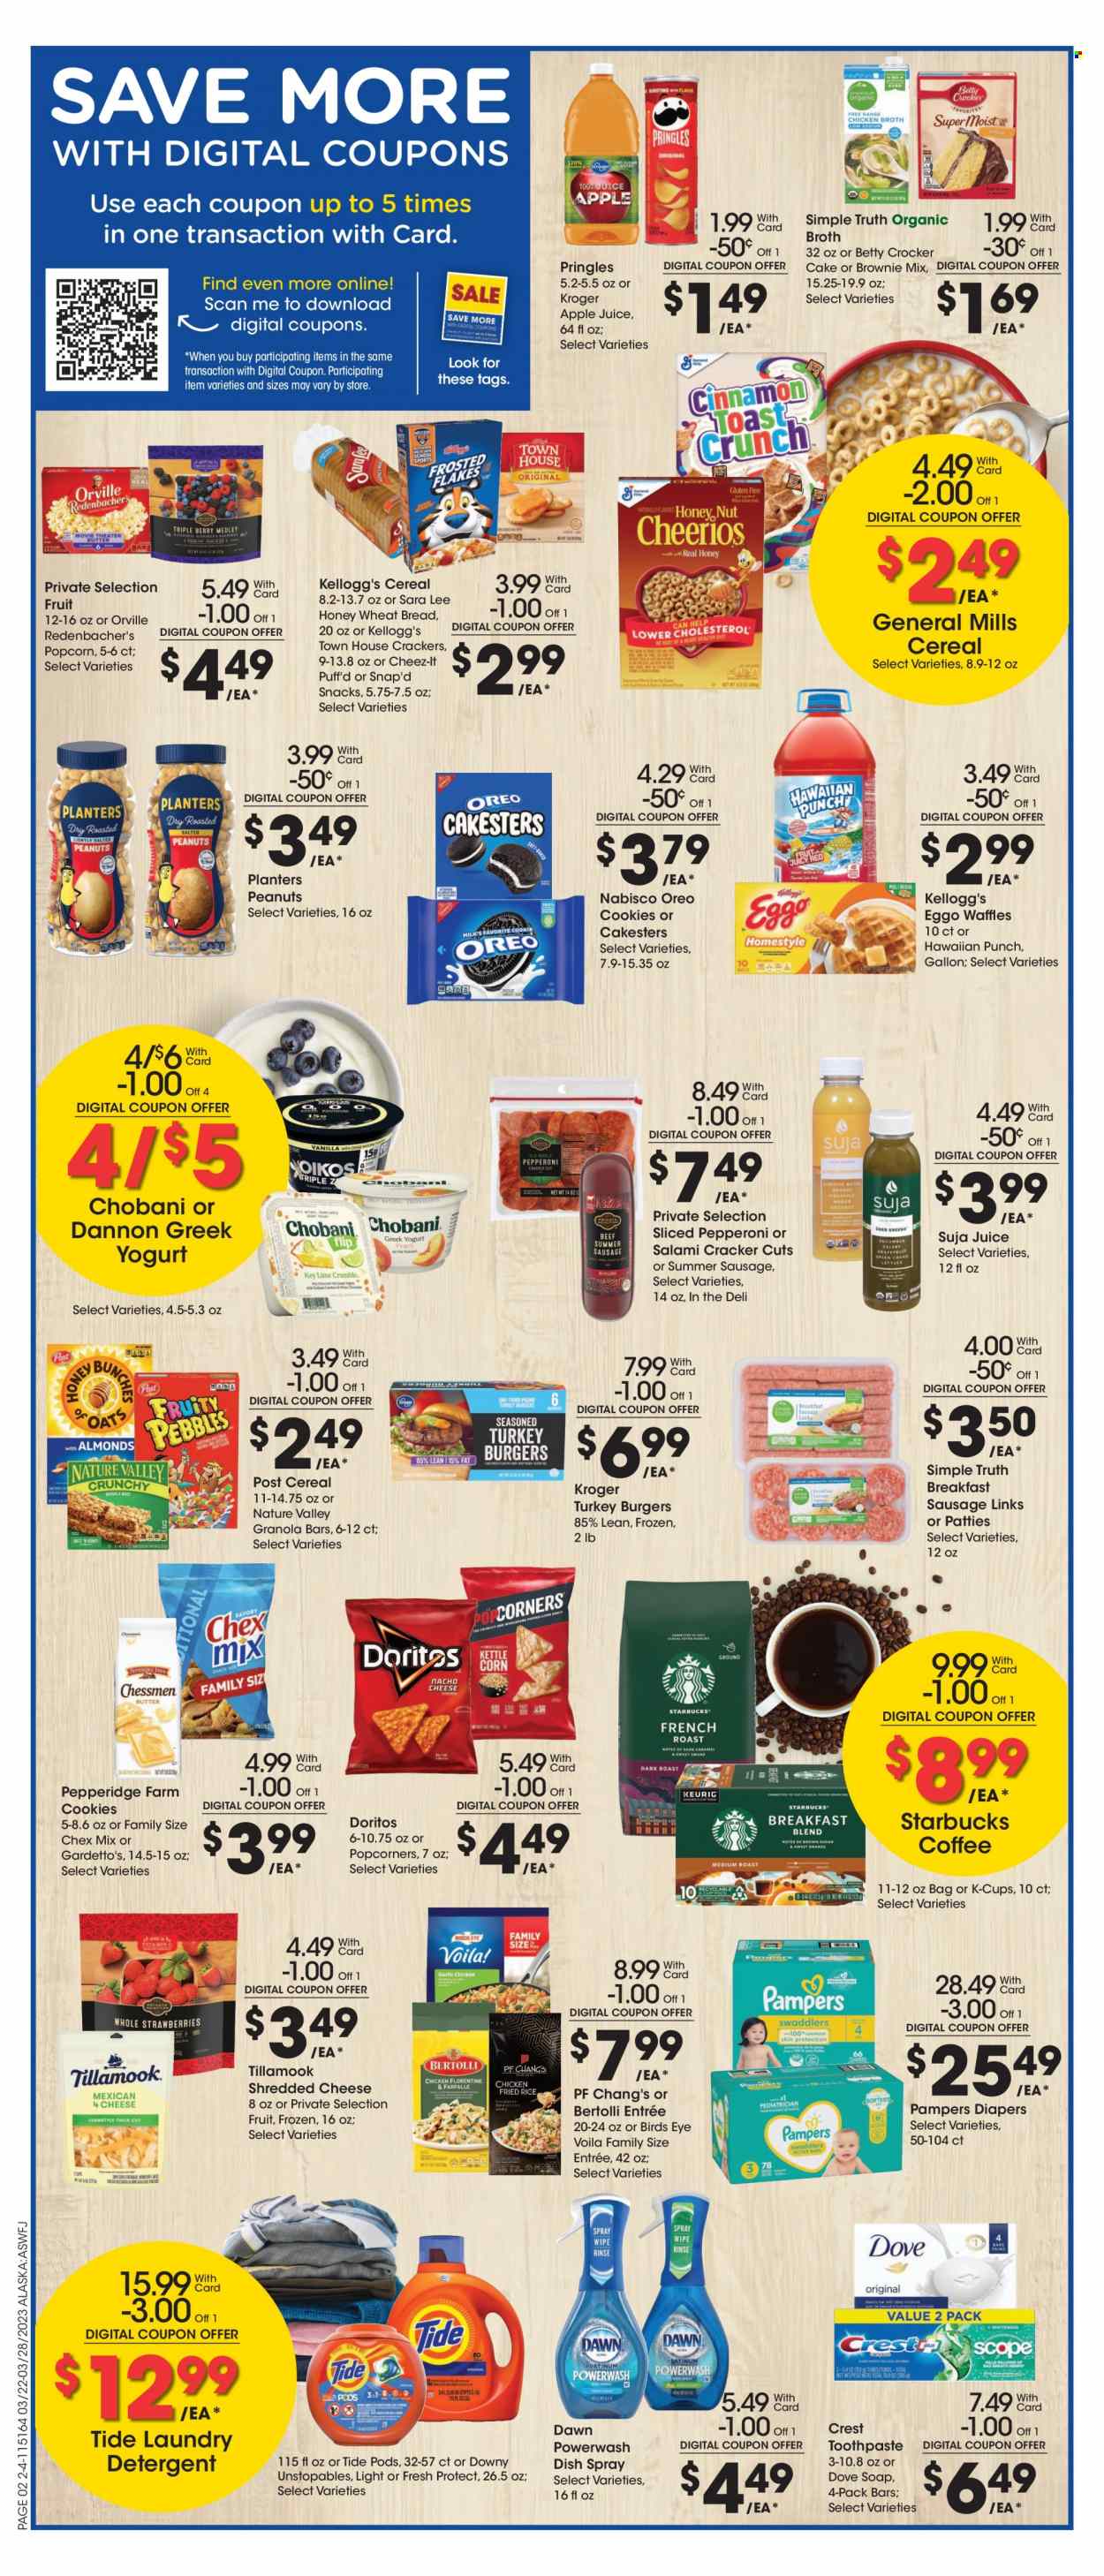 thumbnail - Fred Meyer Flyer - 03/22/2023 - 03/28/2023 - Sales products - wheat bread, cake, Sara Lee, waffles, brownie mix, hamburger, Bird's Eye, Bertolli, roast, salami, sausage, summer sausage, pepperoni, shredded cheese, greek yoghurt, Oreo, yoghurt, Chobani, Dannon, cookies, Dove, snack, crackers, Kellogg's, Doritos, kettle corn, Pringles, popcorn, Cheez-It, Chex Mix, chicken broth, oats, broth, cereals, Cheerios, granola bar, Frosted Flakes, Fruity Pebbles, Nature Valley, cinnamon, almonds, roasted peanuts, peanuts, Planters, apple juice, juice, coffee, Starbucks, coffee capsules, K-Cups, breakfast blend, turkey burger, Pampers, nappies, detergent, Tide, Unstopables, laundry detergent, soap, toothpaste, Crest. Page 8.